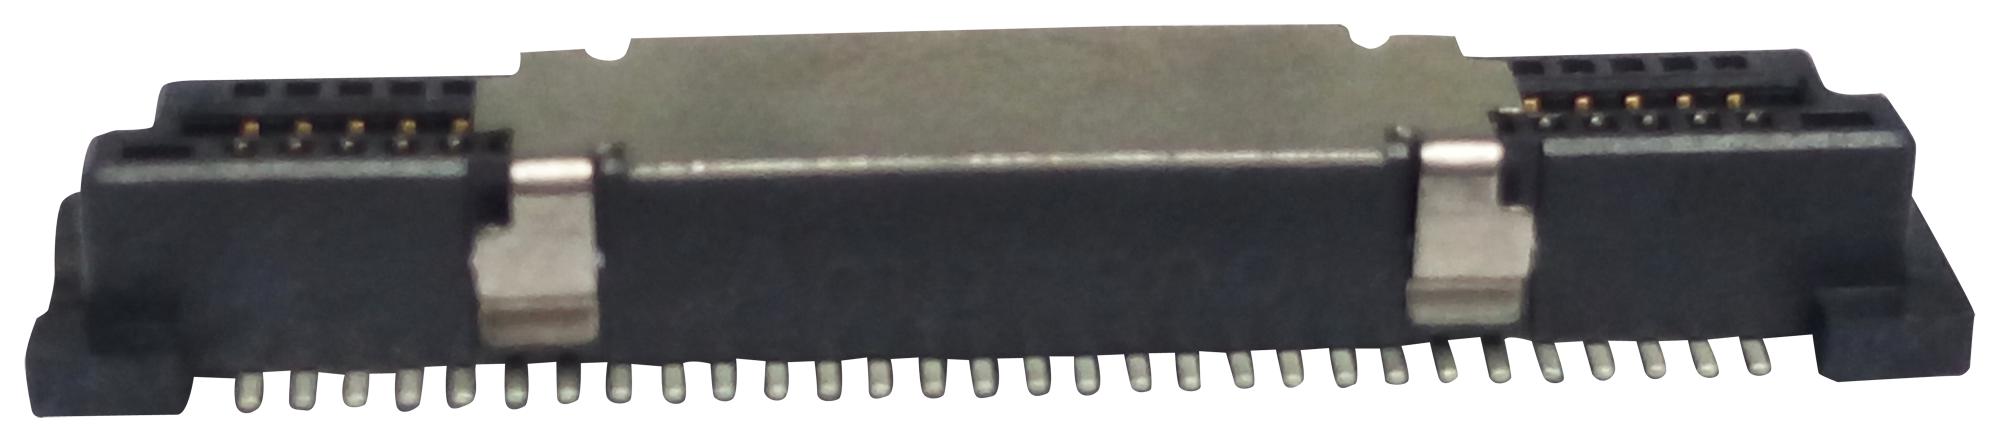 G832MB010641222HR CONNECTOR, RCPT, 64POS, 2ROW, 0.8MM AMPHENOL ICC